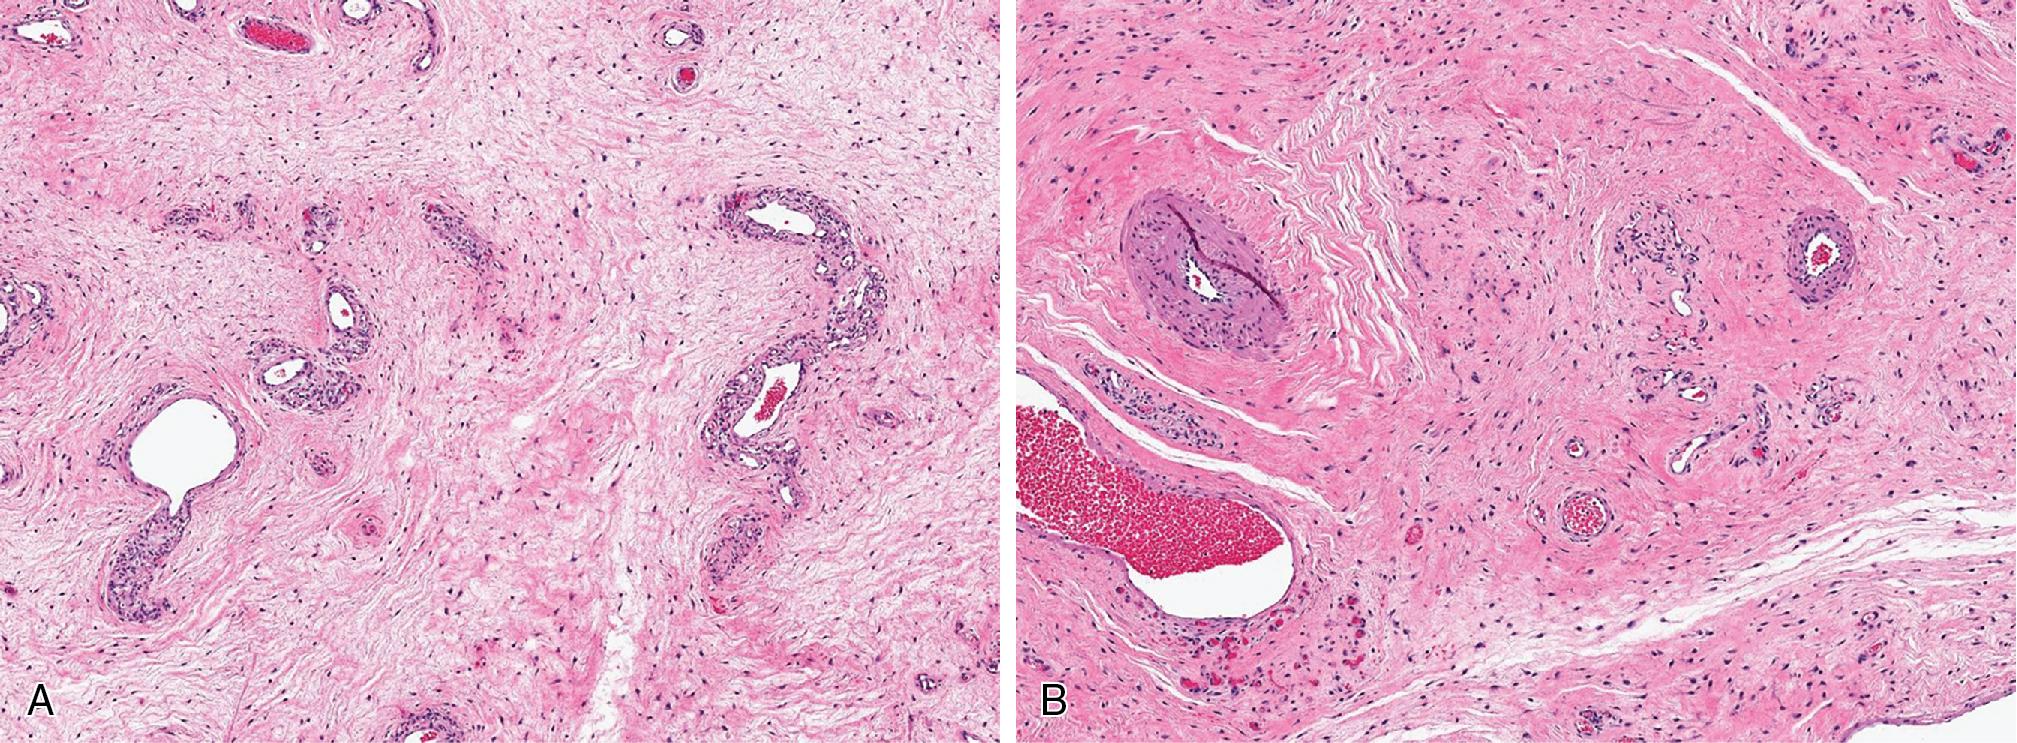 Fig. 8.30, A and B, Deep angiomyxoma is a relatively hypocellular but infiltrative spindled cell neoplasm, with abundant edematous to lightly myxoid stroma, admixed with medium to large muscular-walled blood vessels.